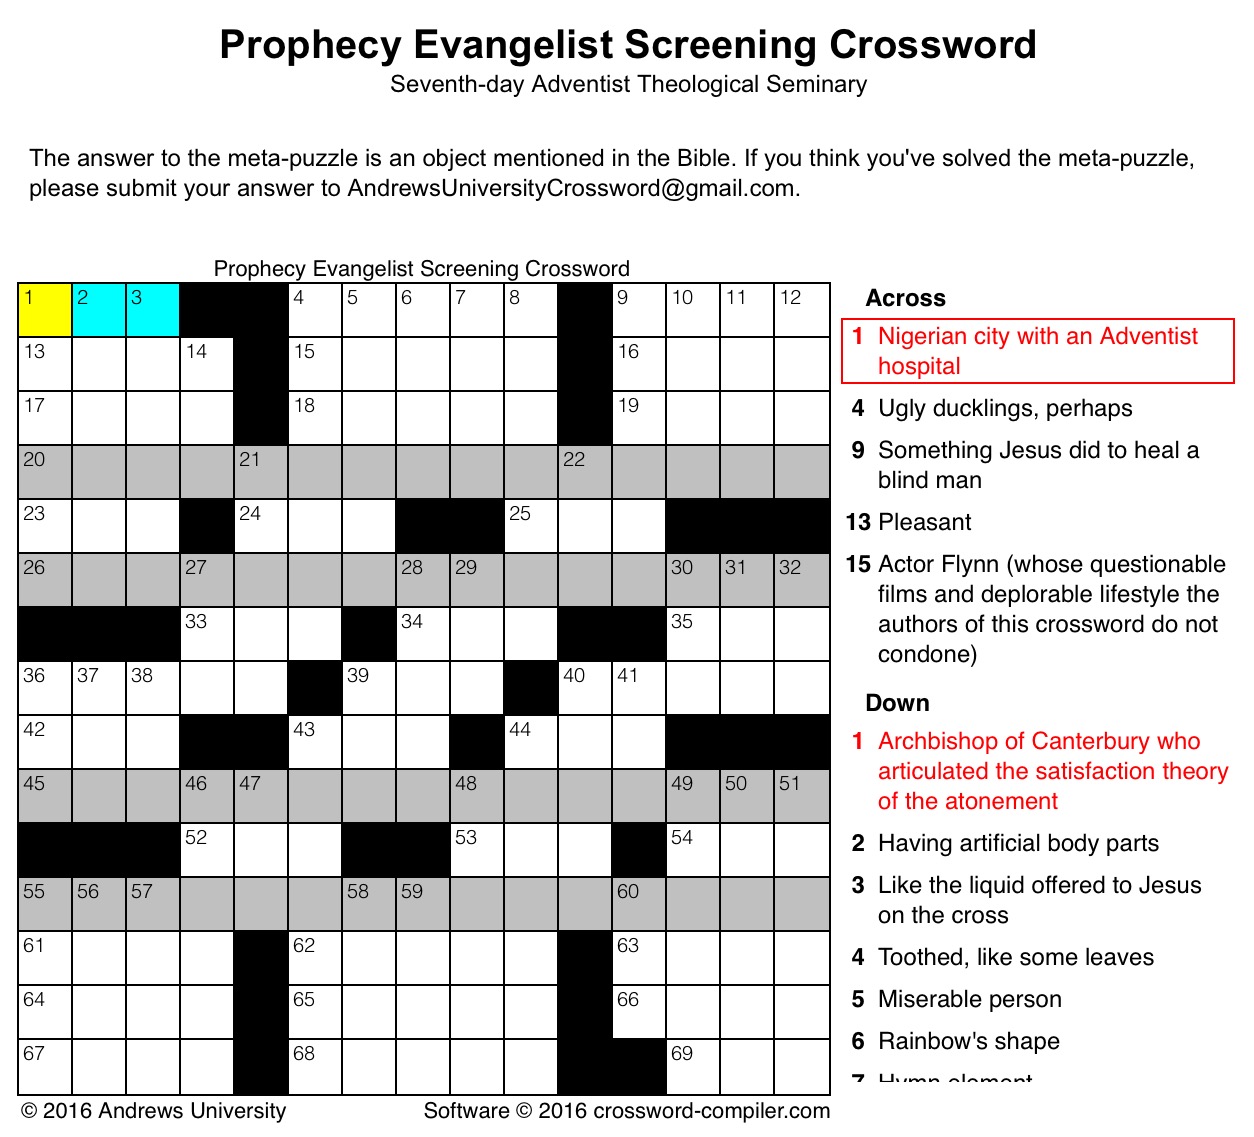 Andrews seminary to identify potential prophecy evangelists with this crossword